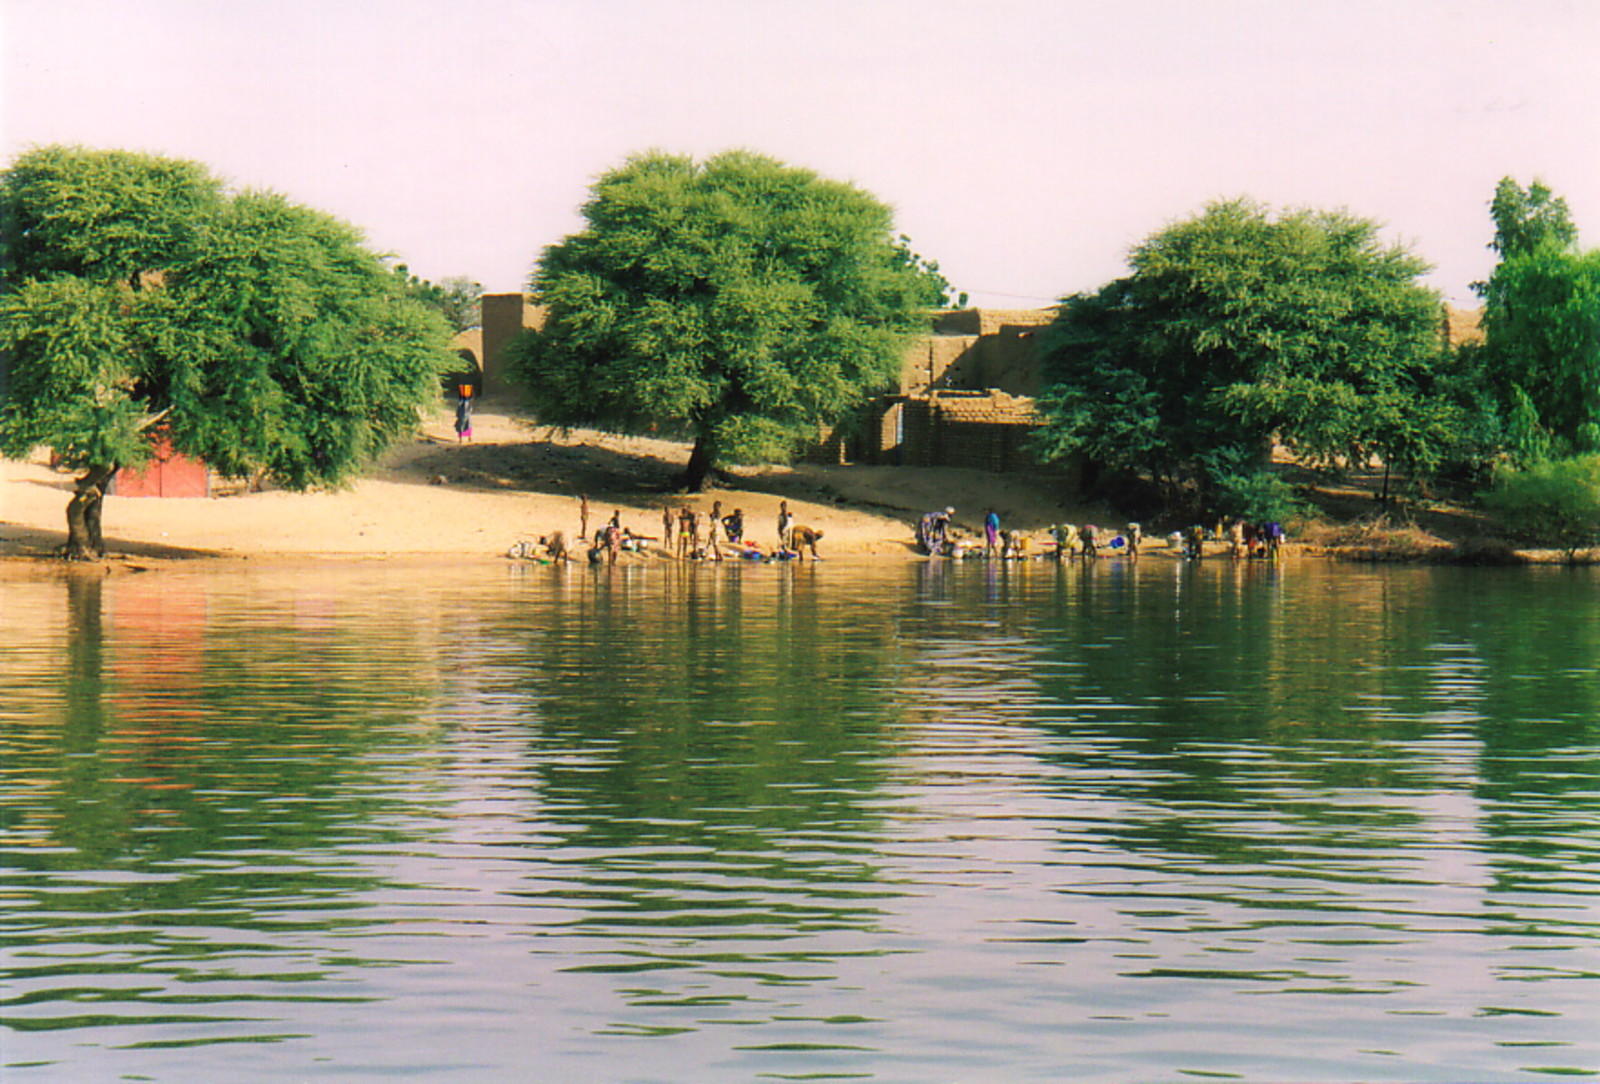 Trees along the banks of the River Niger